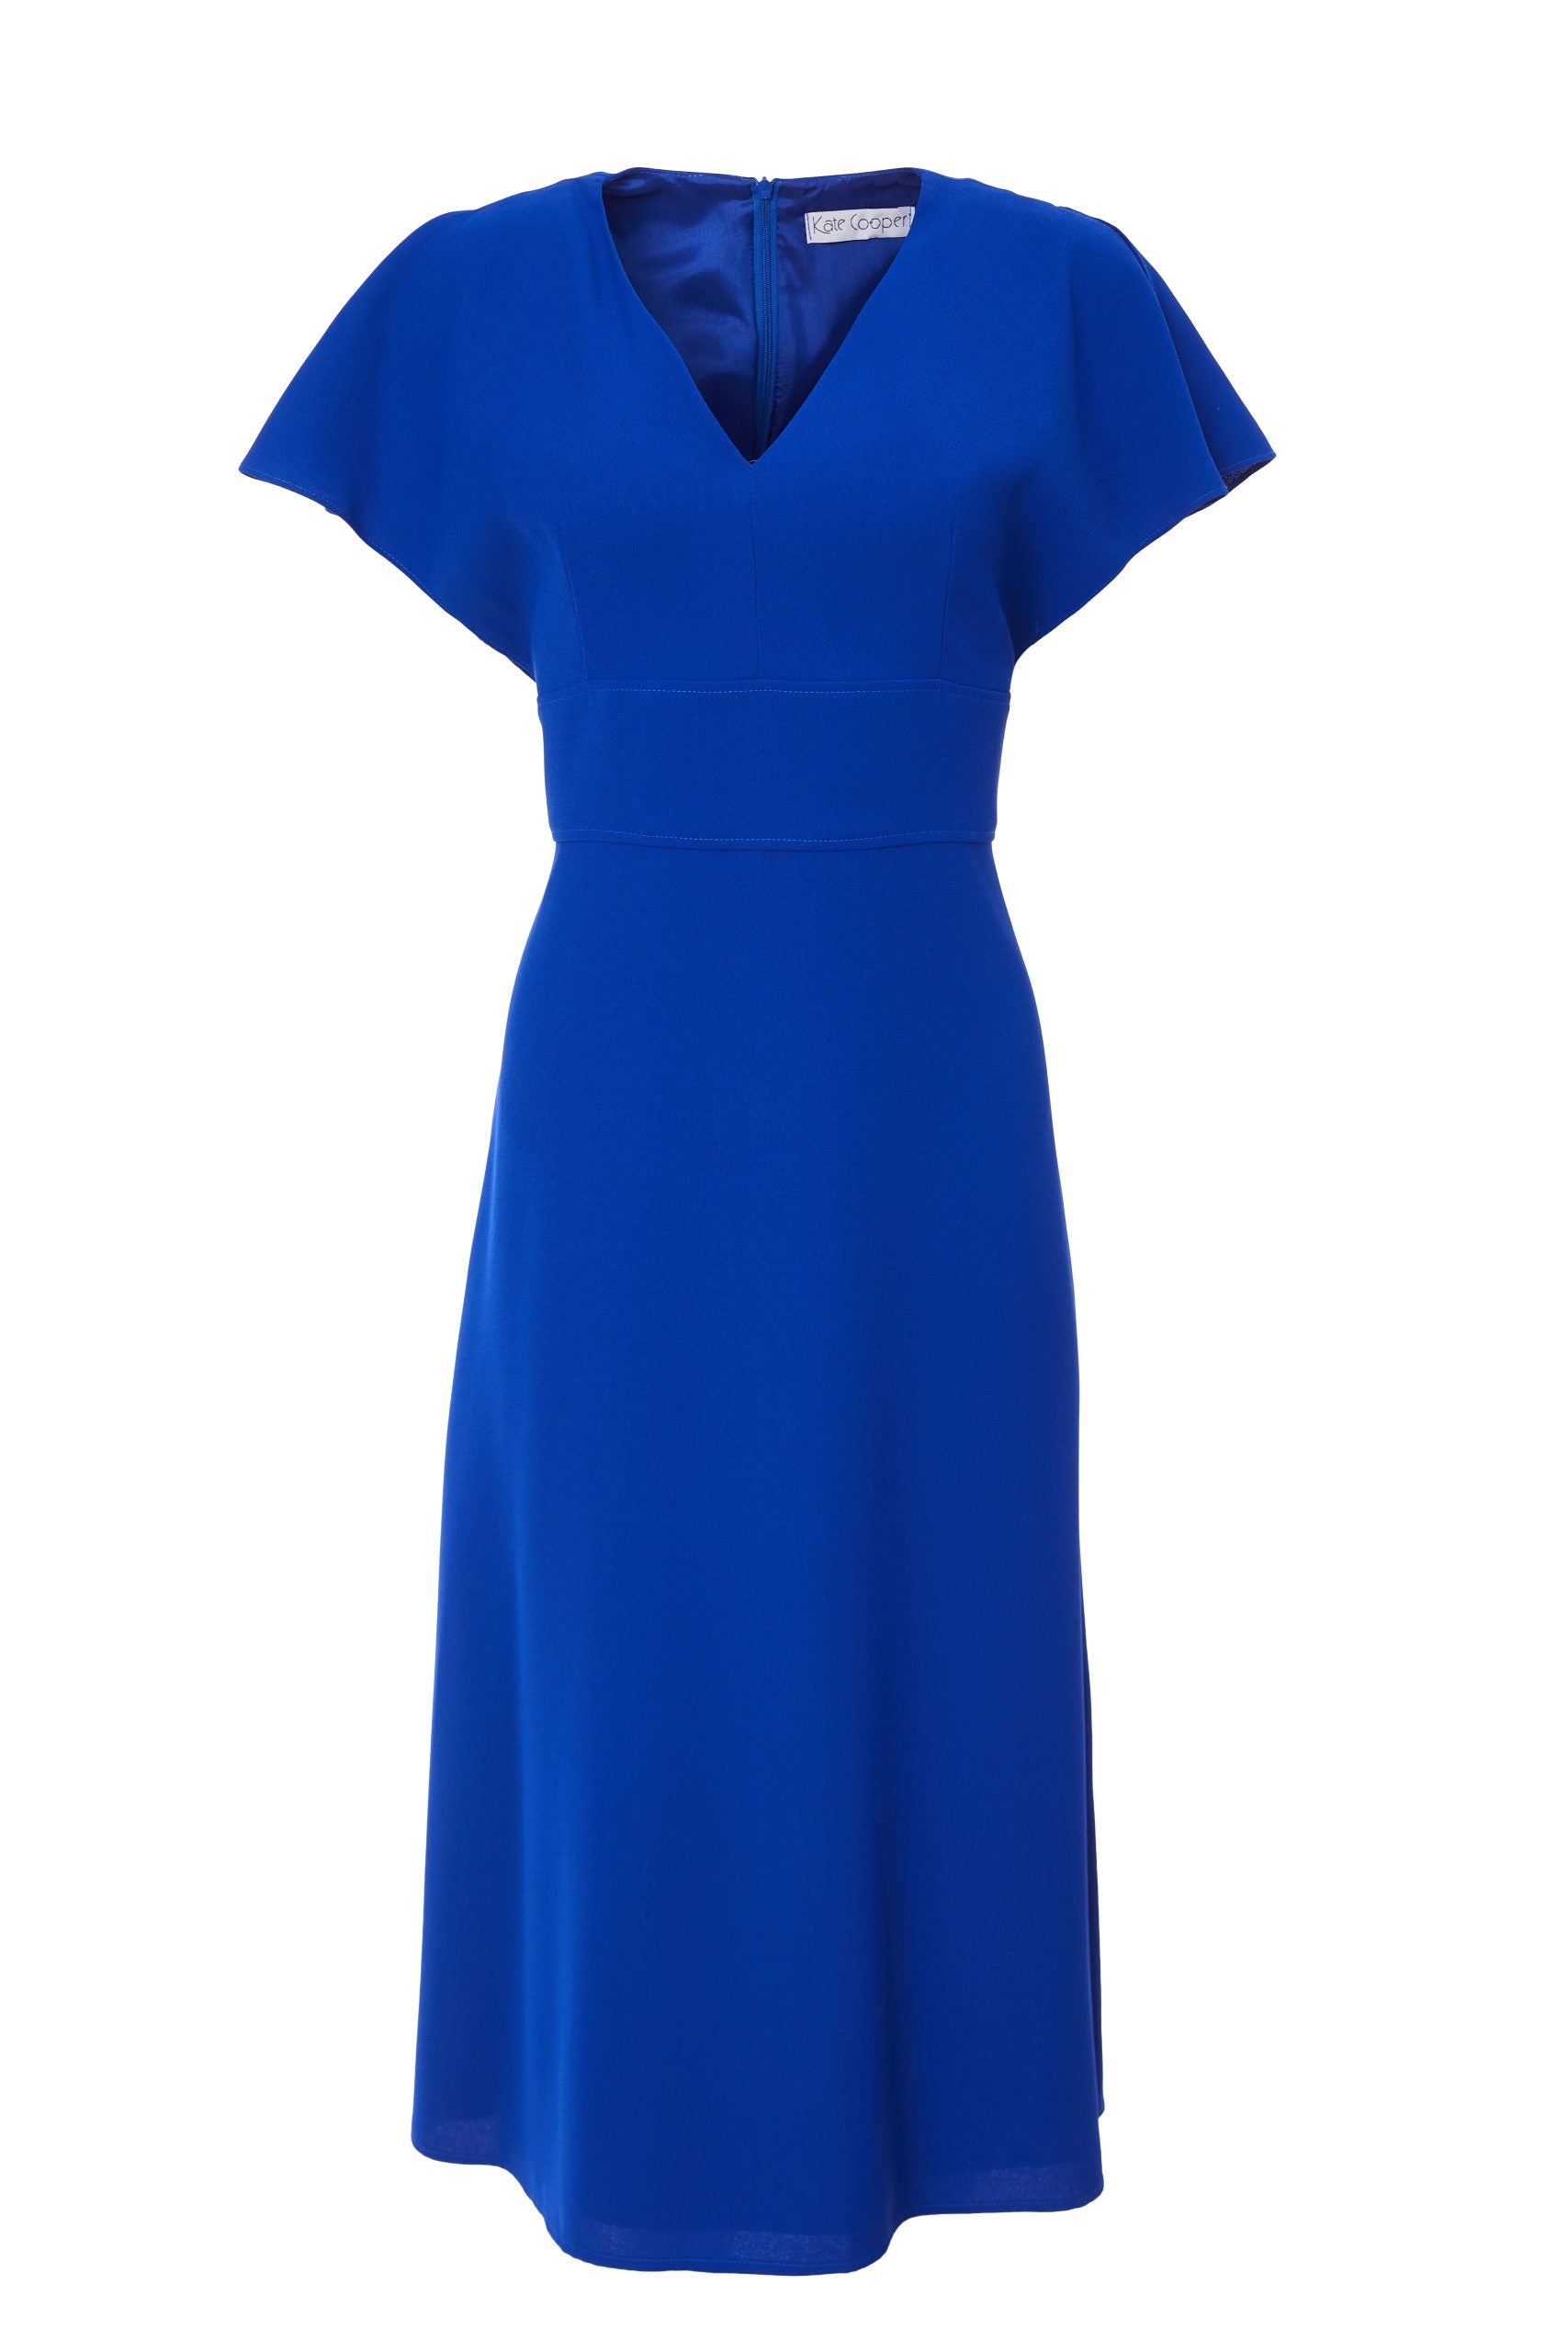 V-Neck Dress with Sleeve Detail in Royal Blue